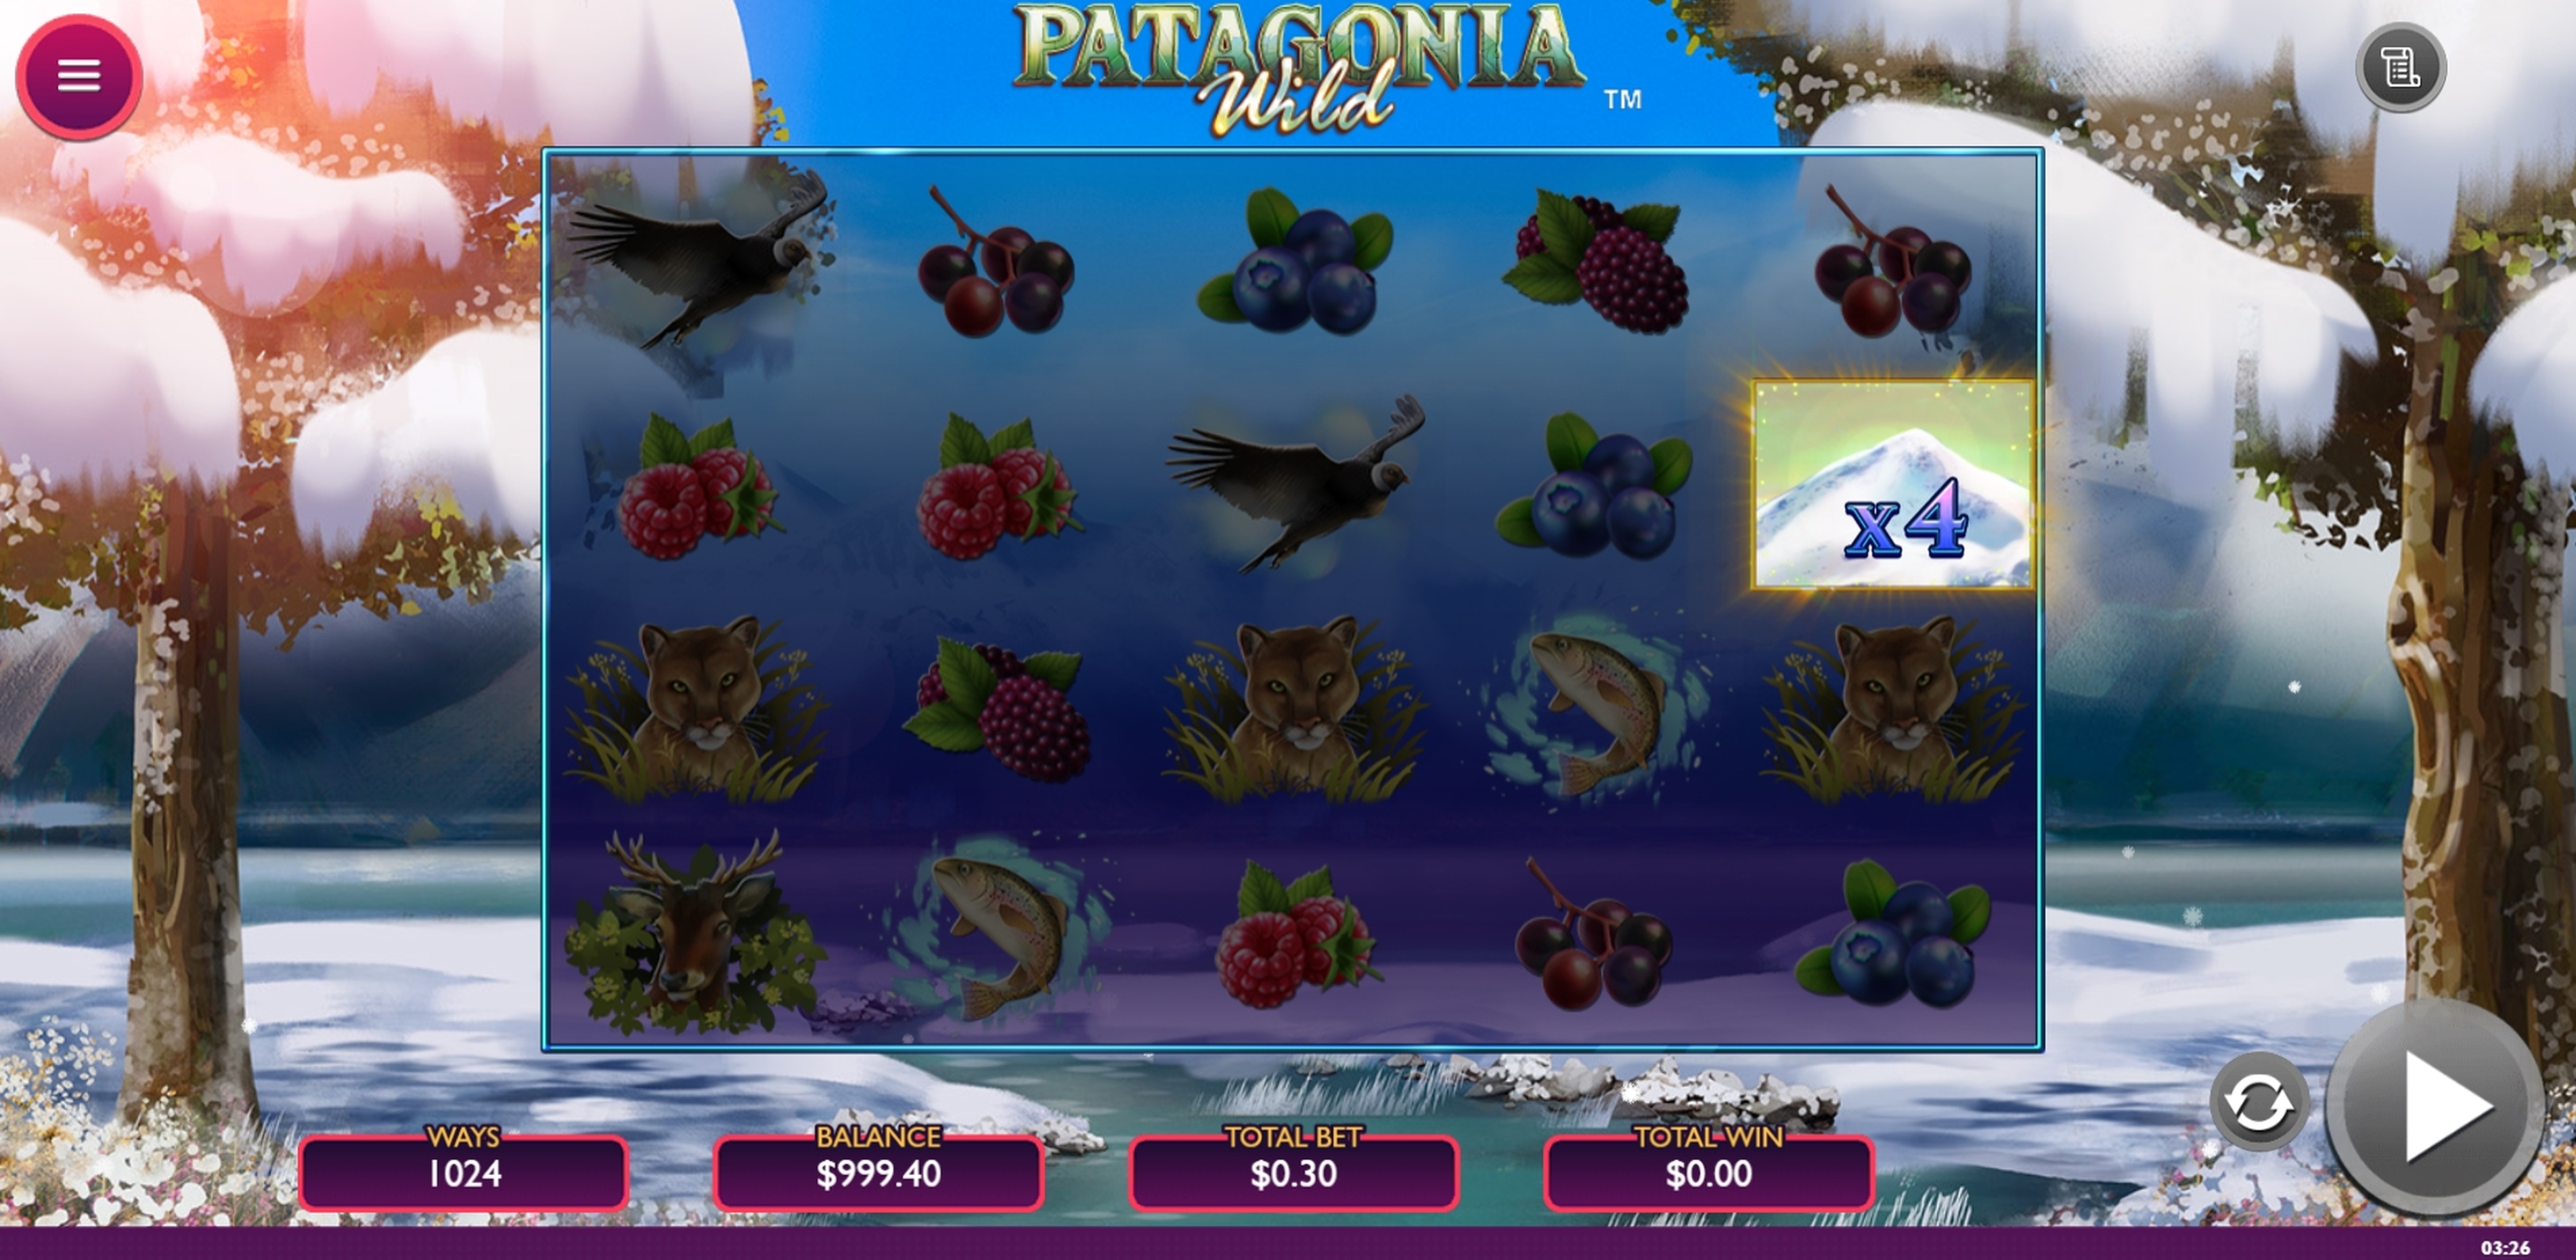 Win Money in Patagonia Free Slot Game by Spieldev